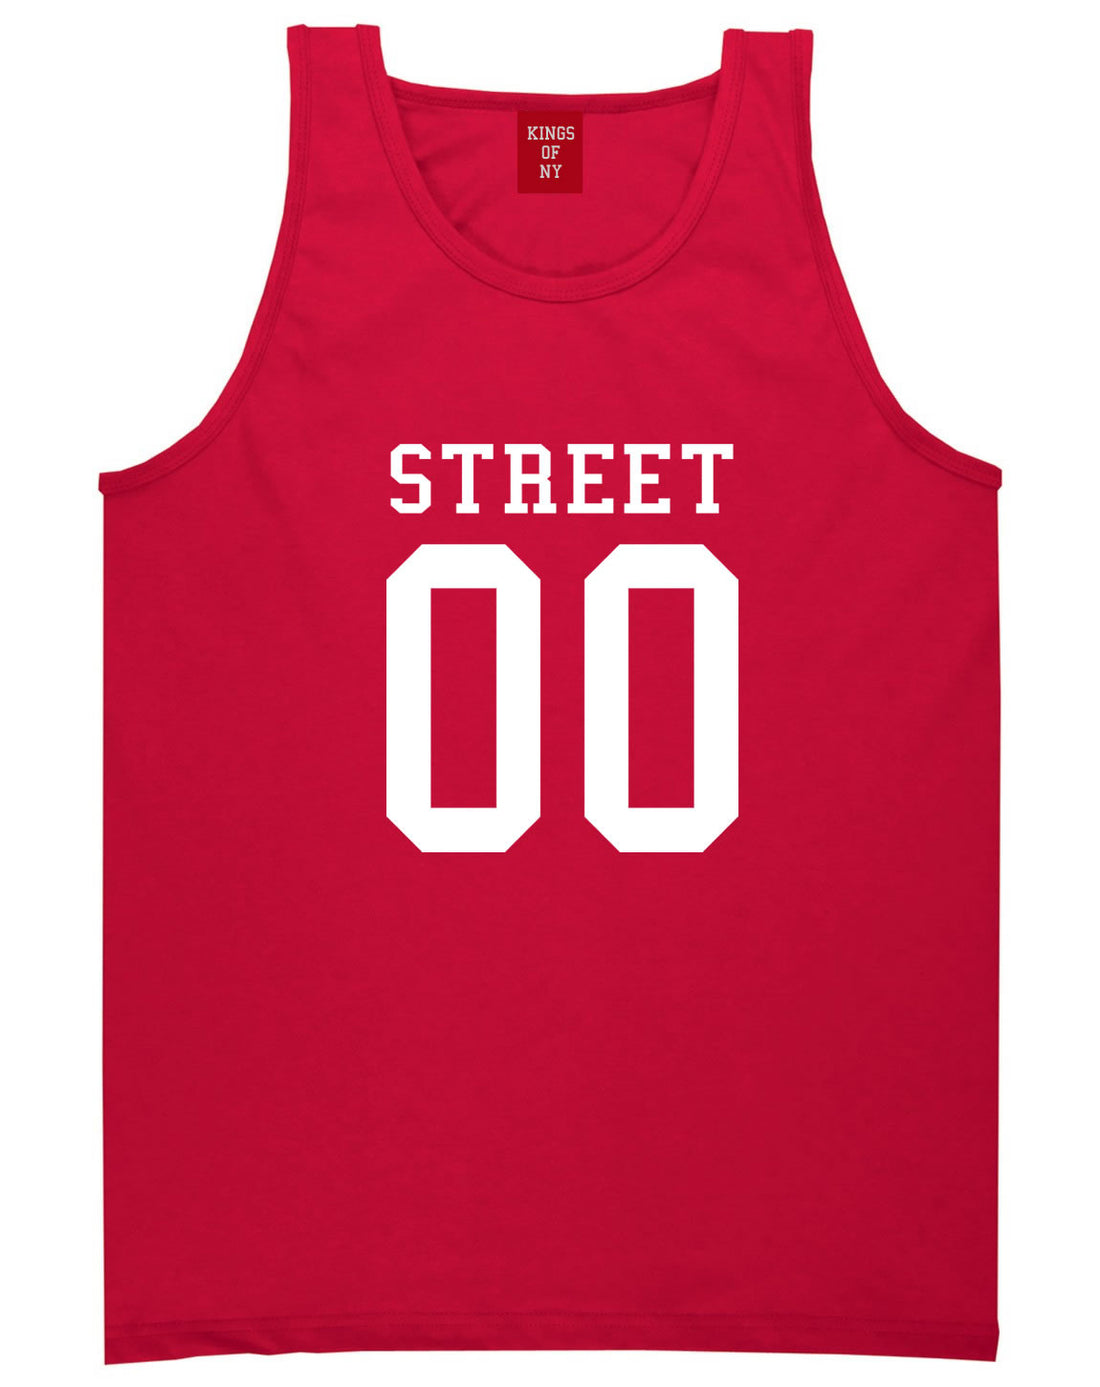 Street Team 00 Jersey Tank Top in Red By Kings Of NY